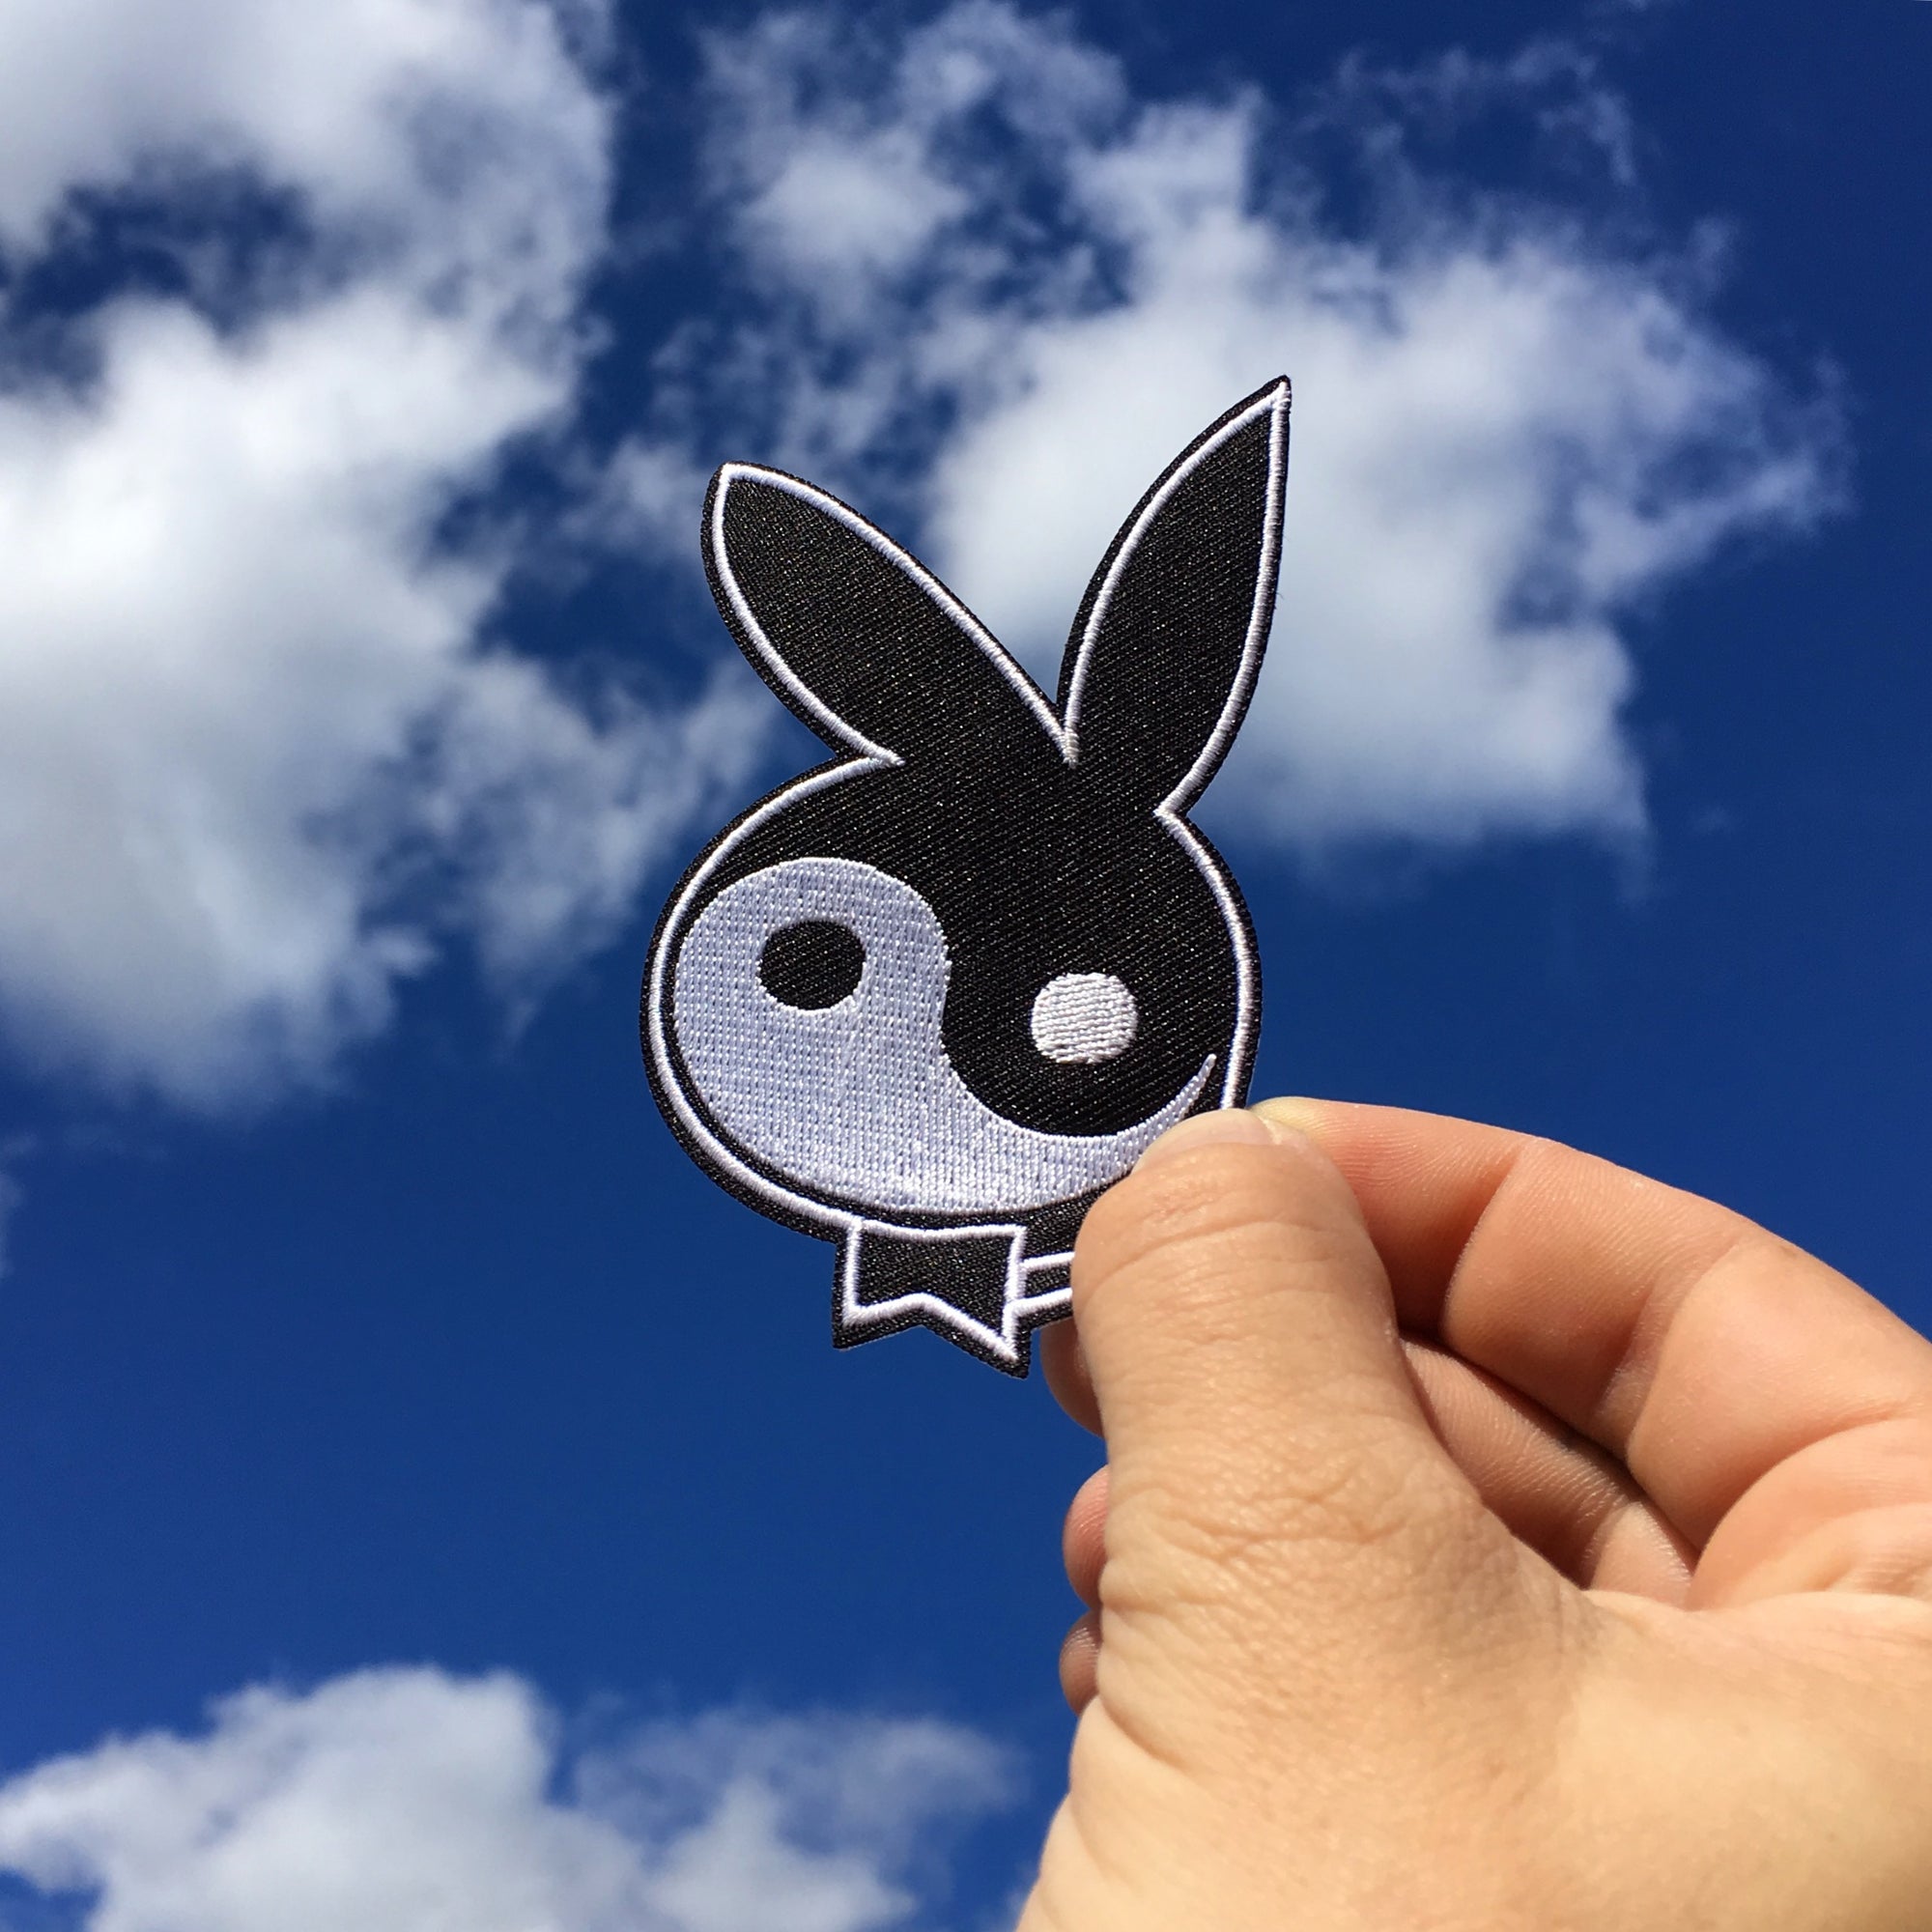 No Fun Press - original "yin yang bunny" embroidered iron-on patch held up against the sky.